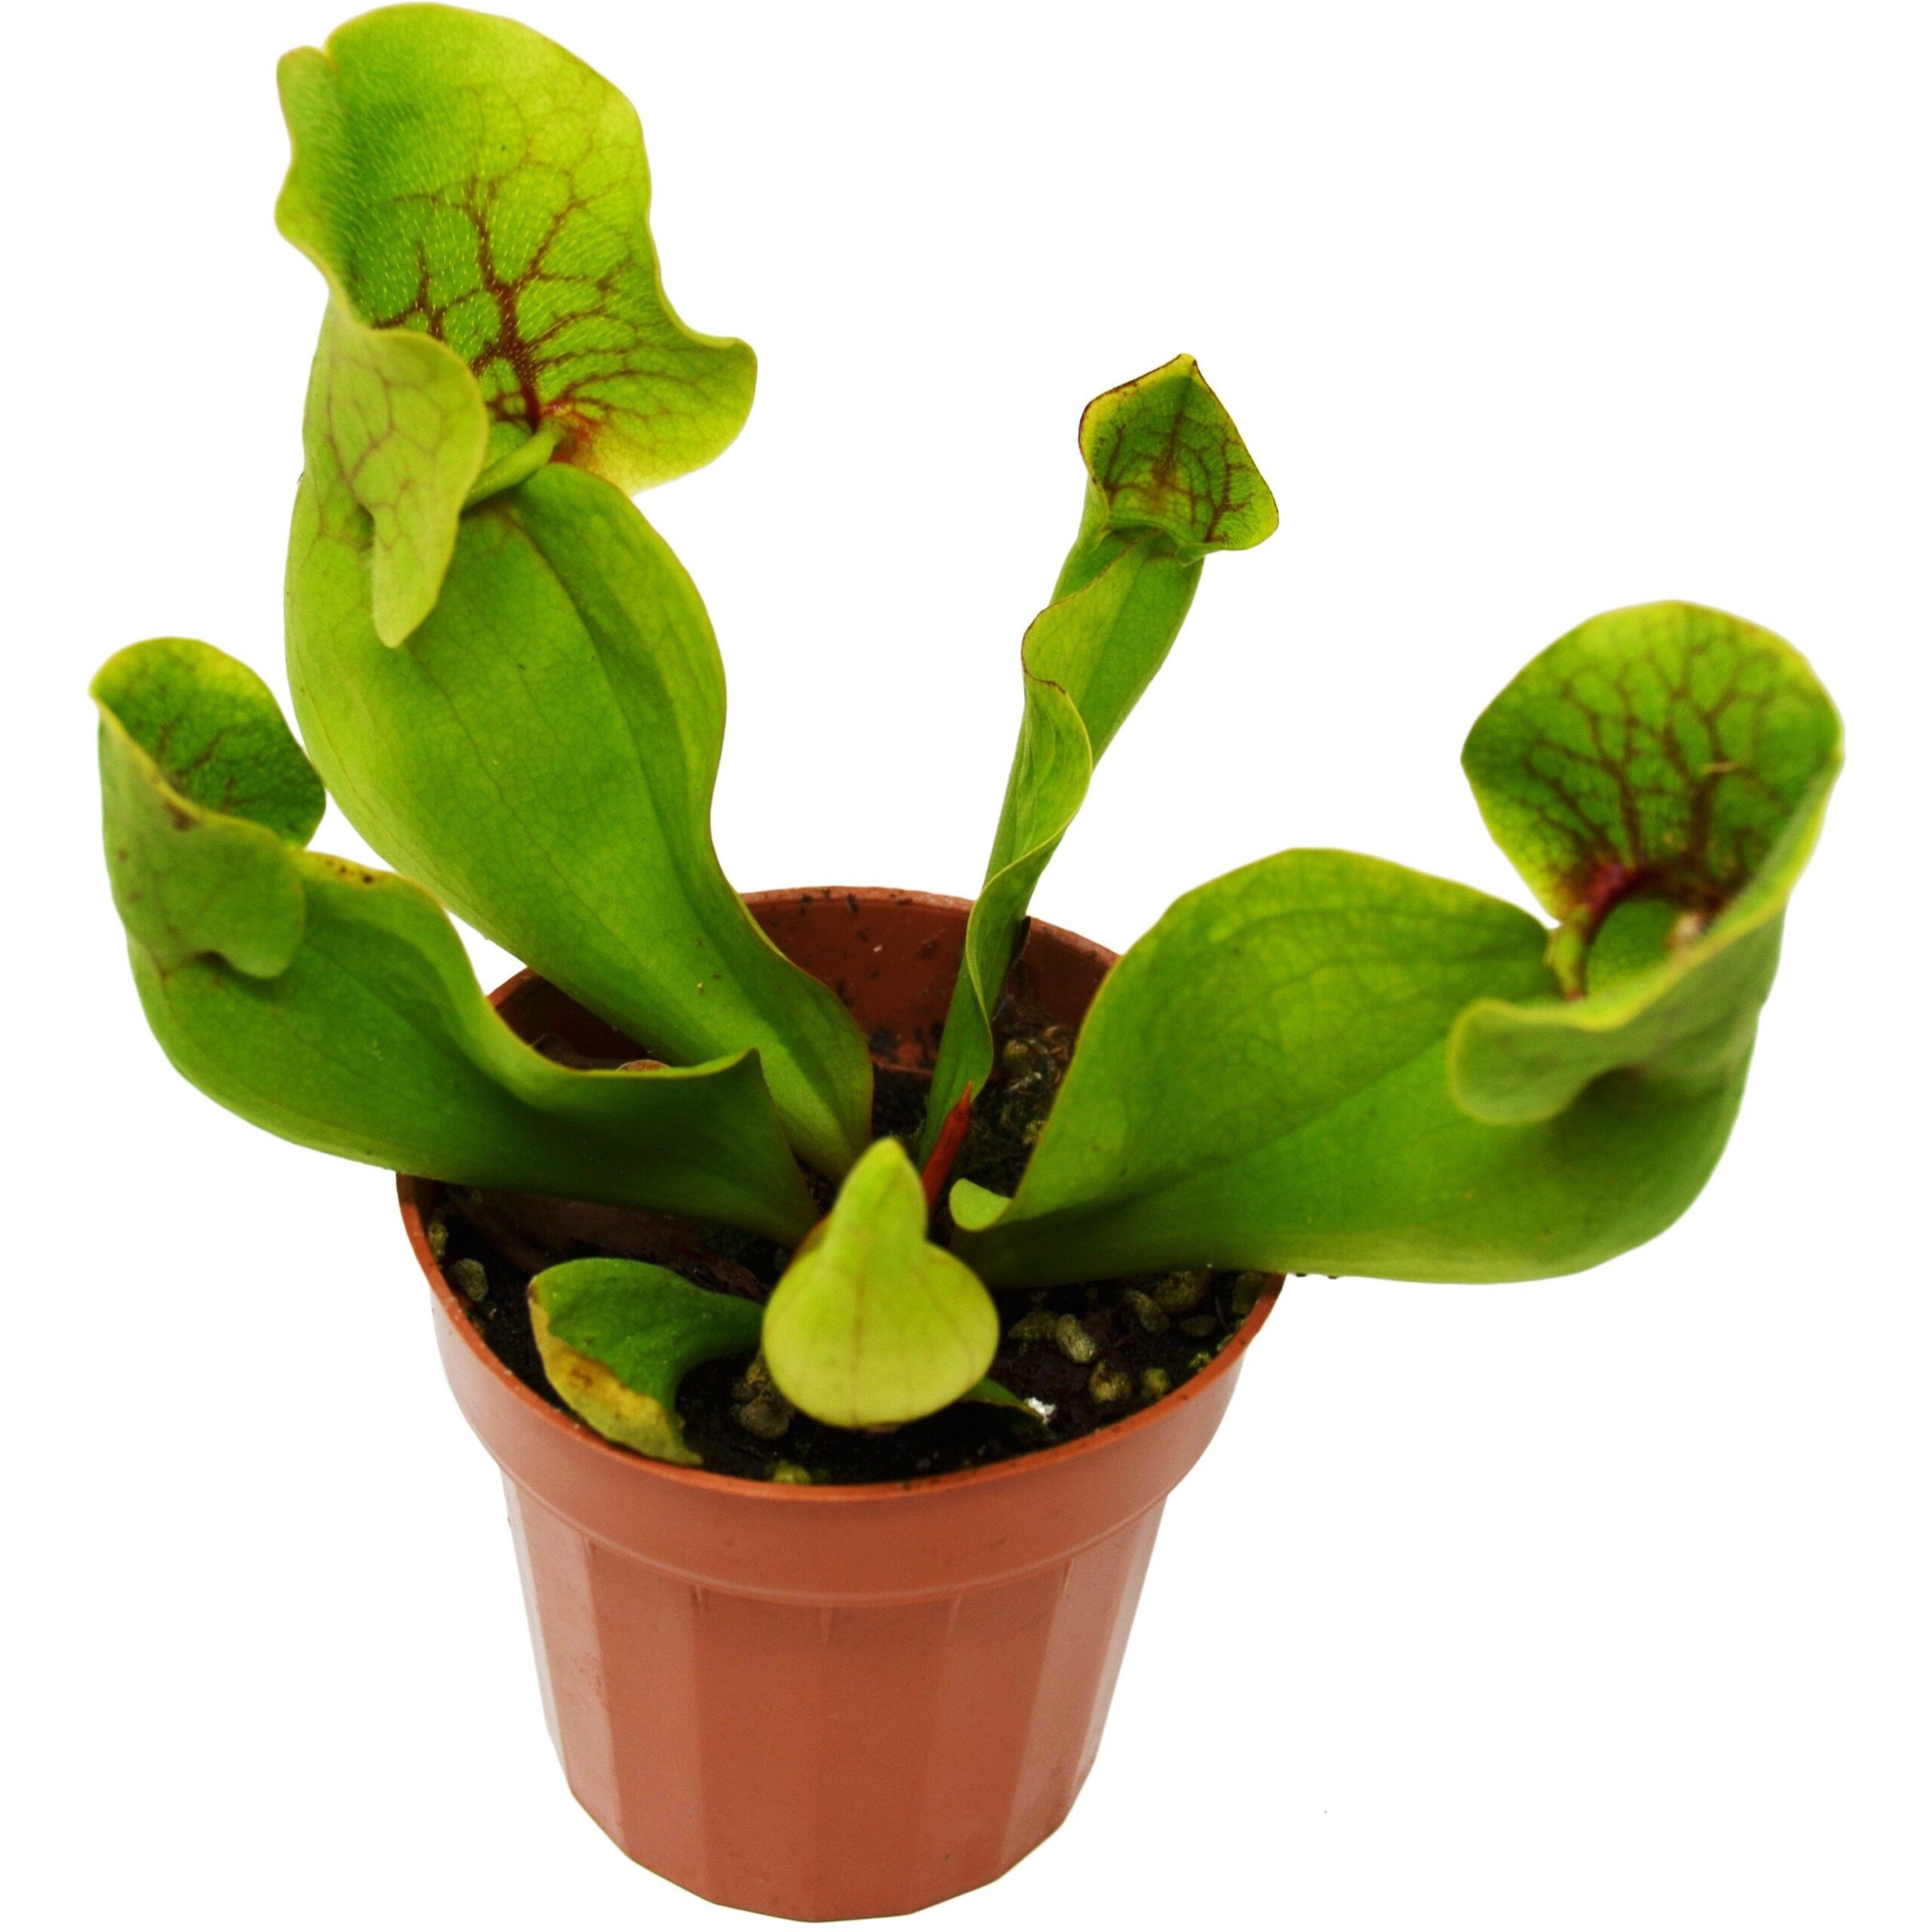 A pitcher plant in a pot on a white background, available at the best plant nursery near me.